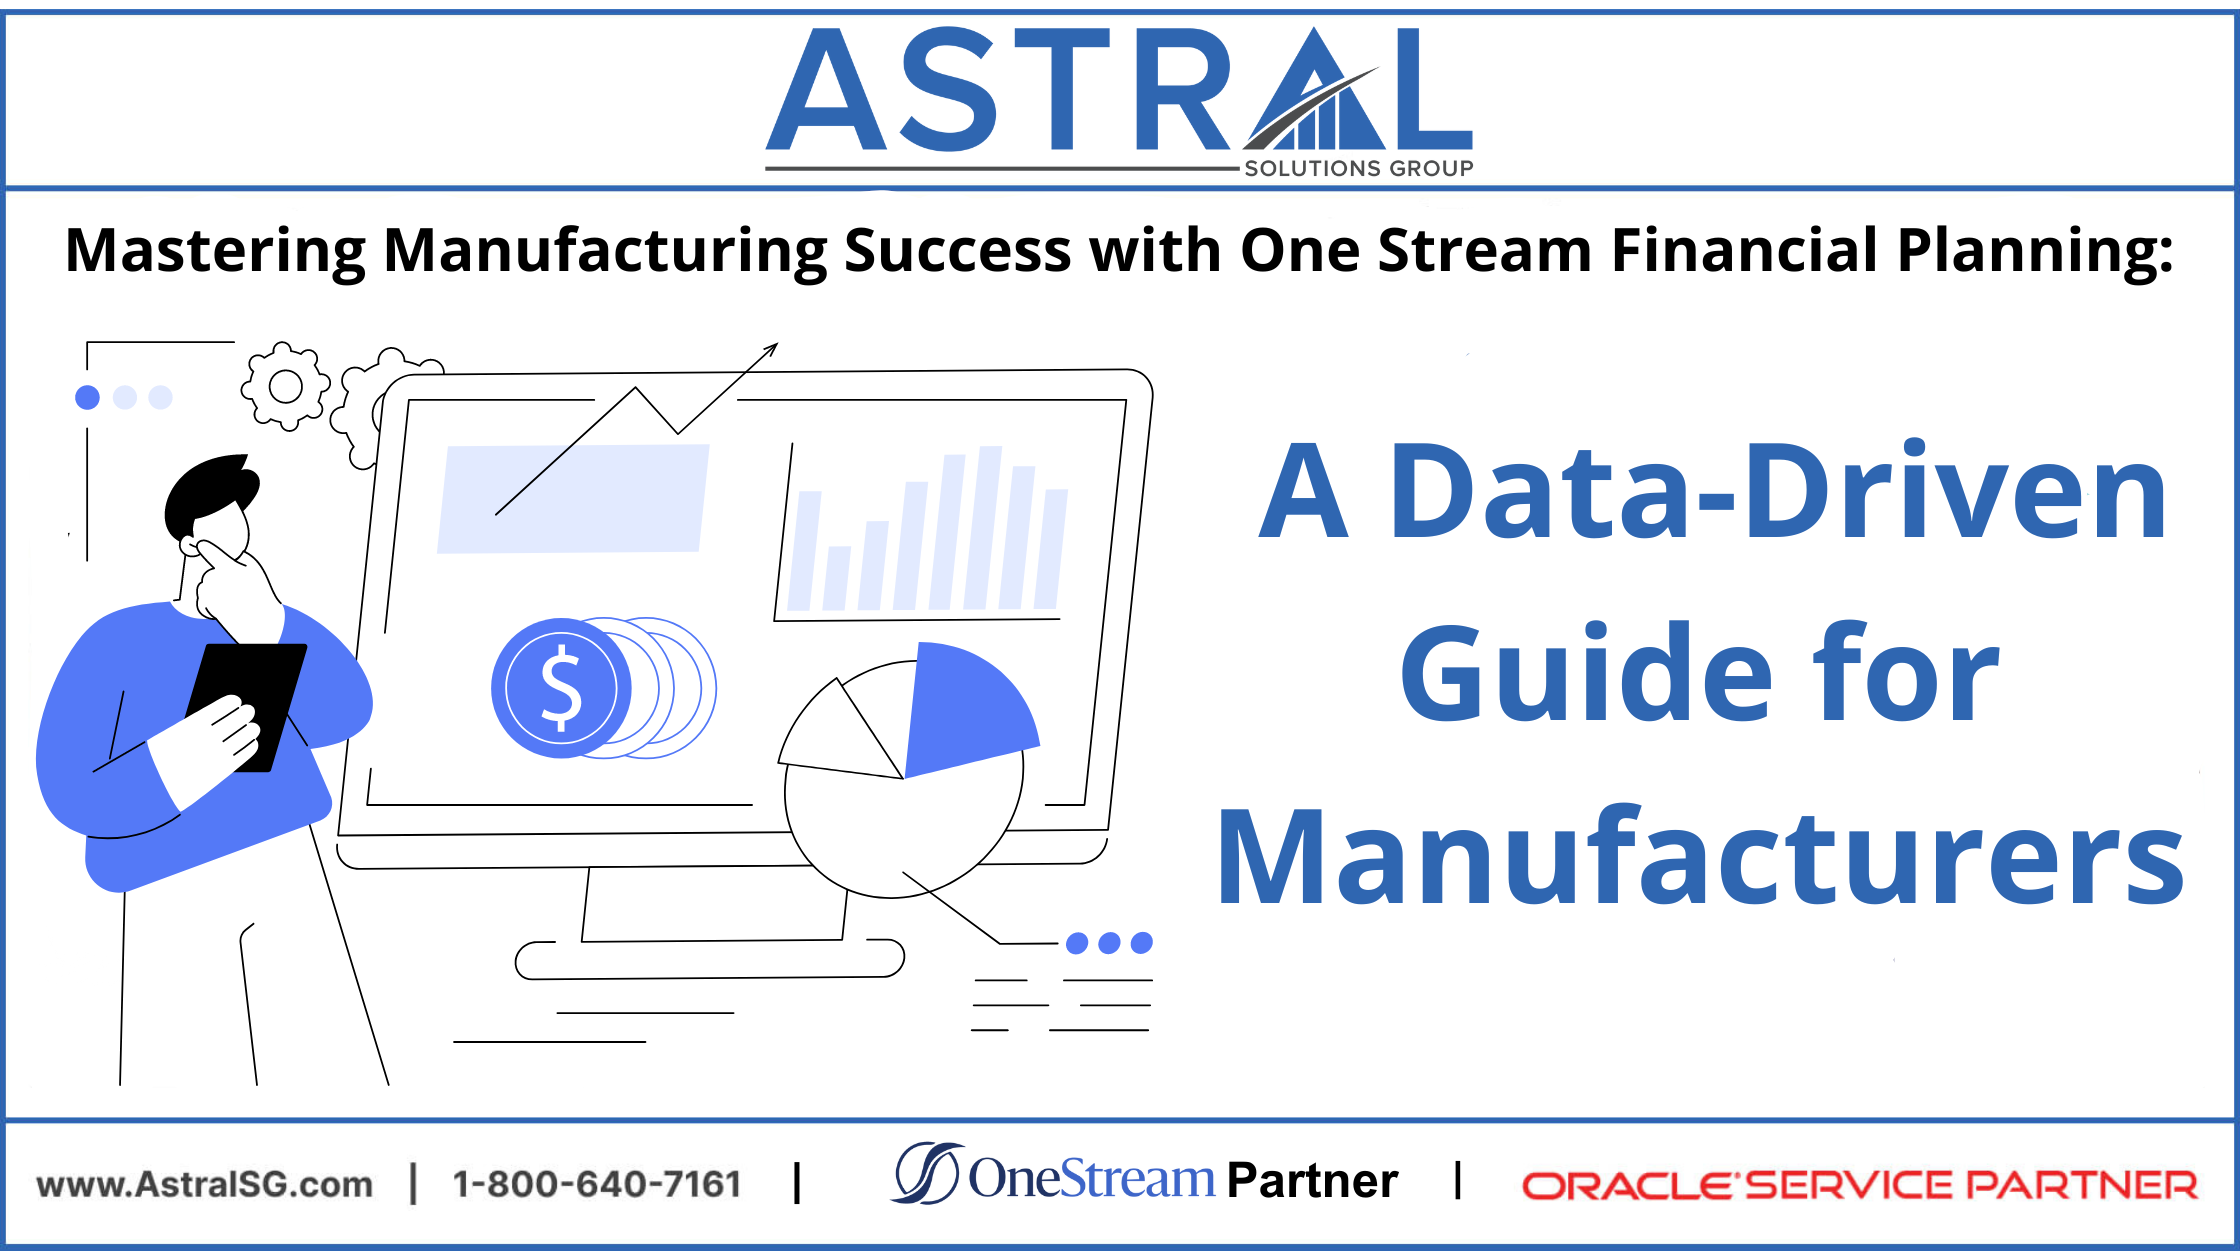 Mastering Manufacturing Success with One Stream Financial Planning: A Data-Driven Guide for Manufacturers